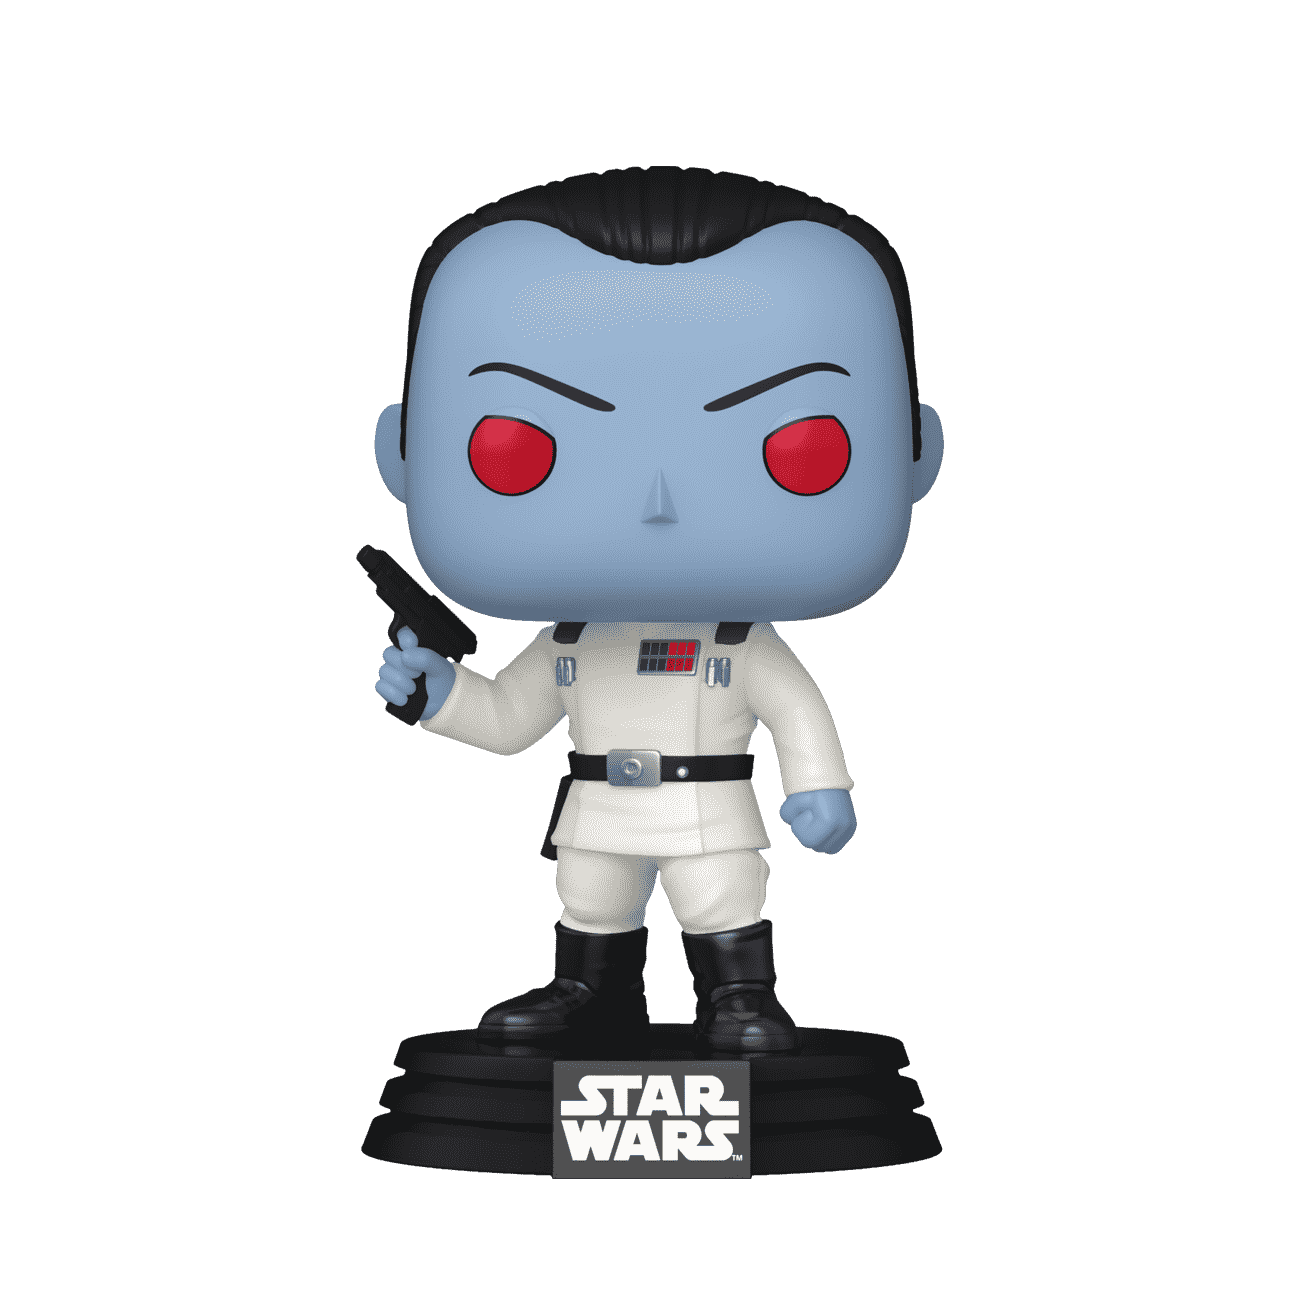 Best Funko Pop movie figures including Marvel, DC and Star Wars